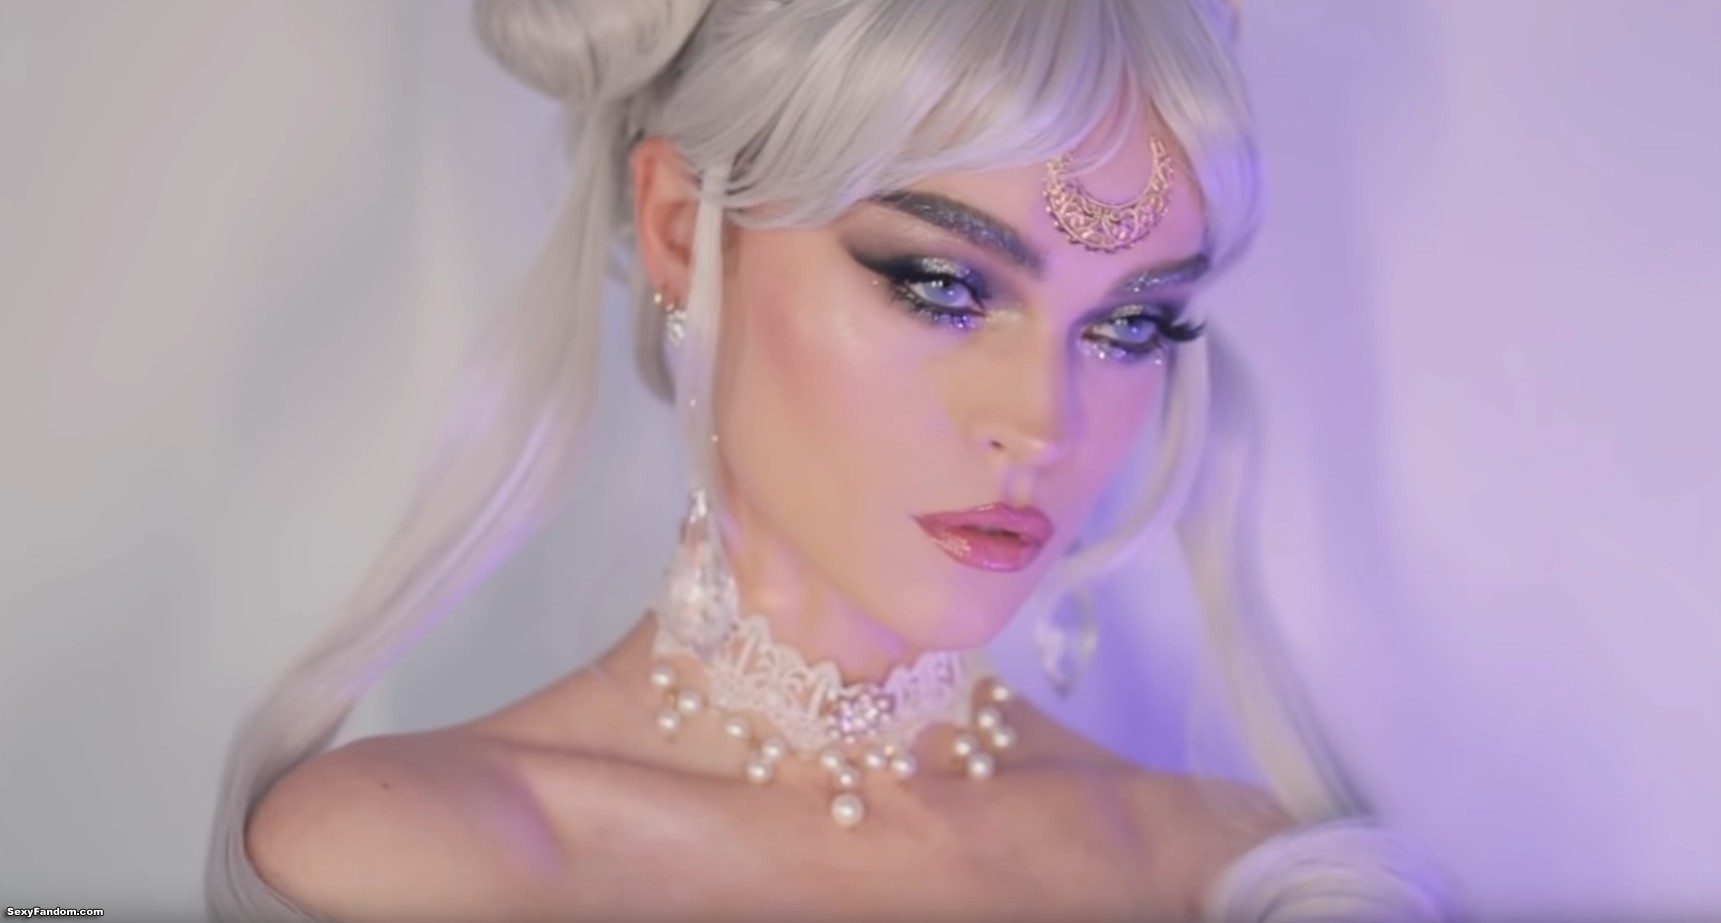 You Will Be Over The Moon For This Queen Serenity Look By PICTURRESQUE I Regina